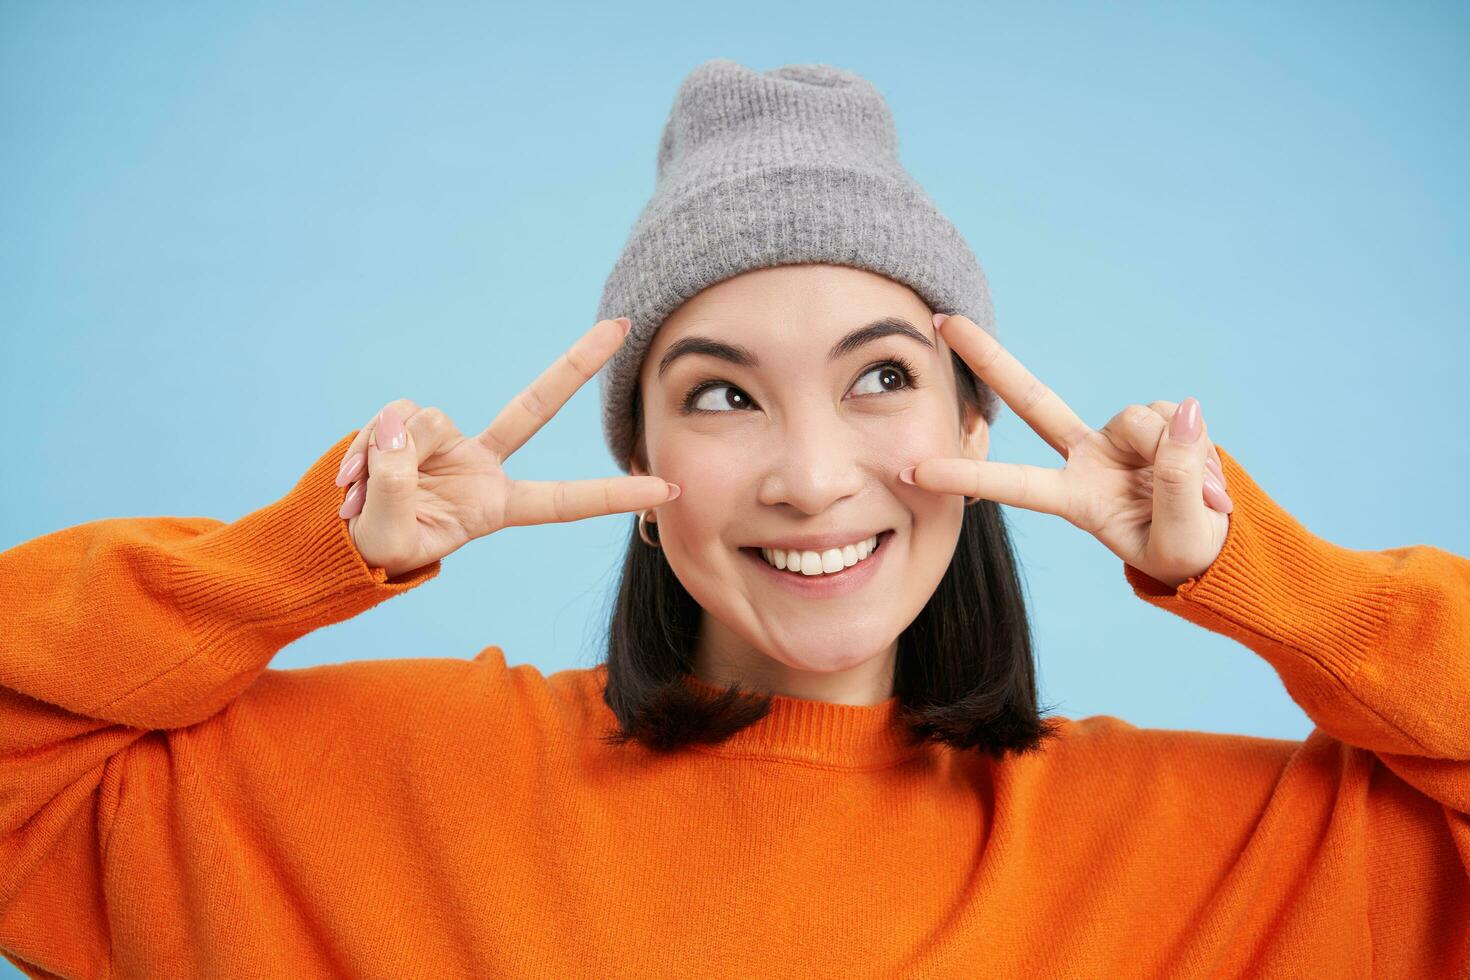 Close up portrait of cute korean girl in beanie, shows peace, vsign gesture, positive vibe, smiling and laughing, posing over blue background photo